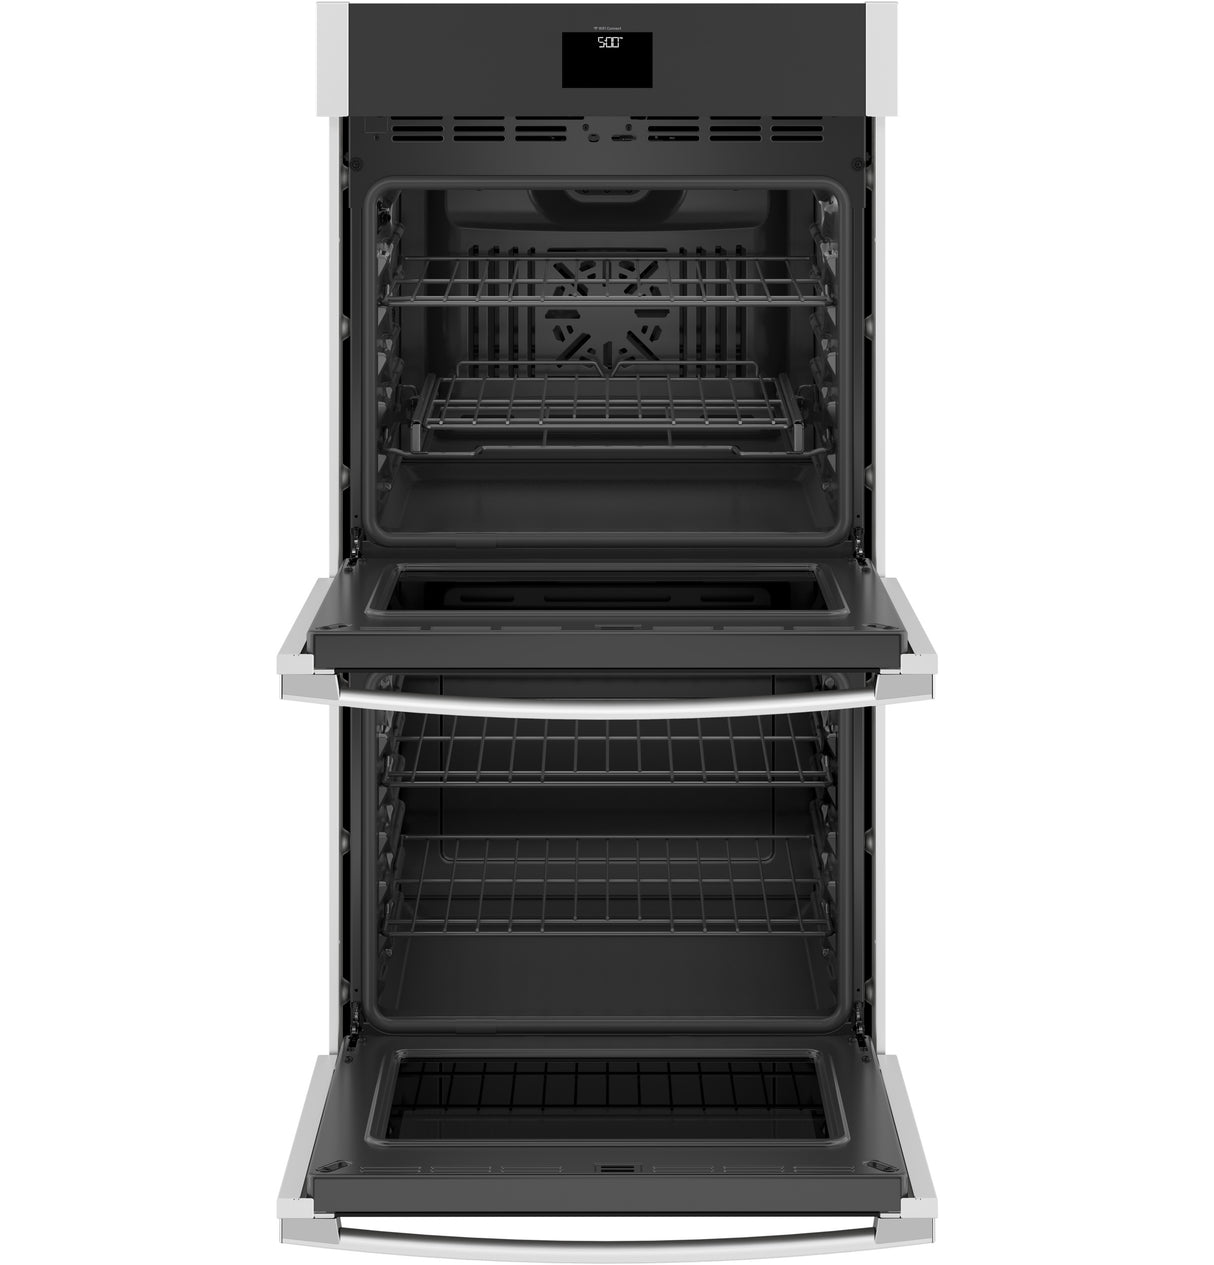 GE(R) 27" Smart Built-In Convection Double Wall Oven - (JKD5000SNSS)